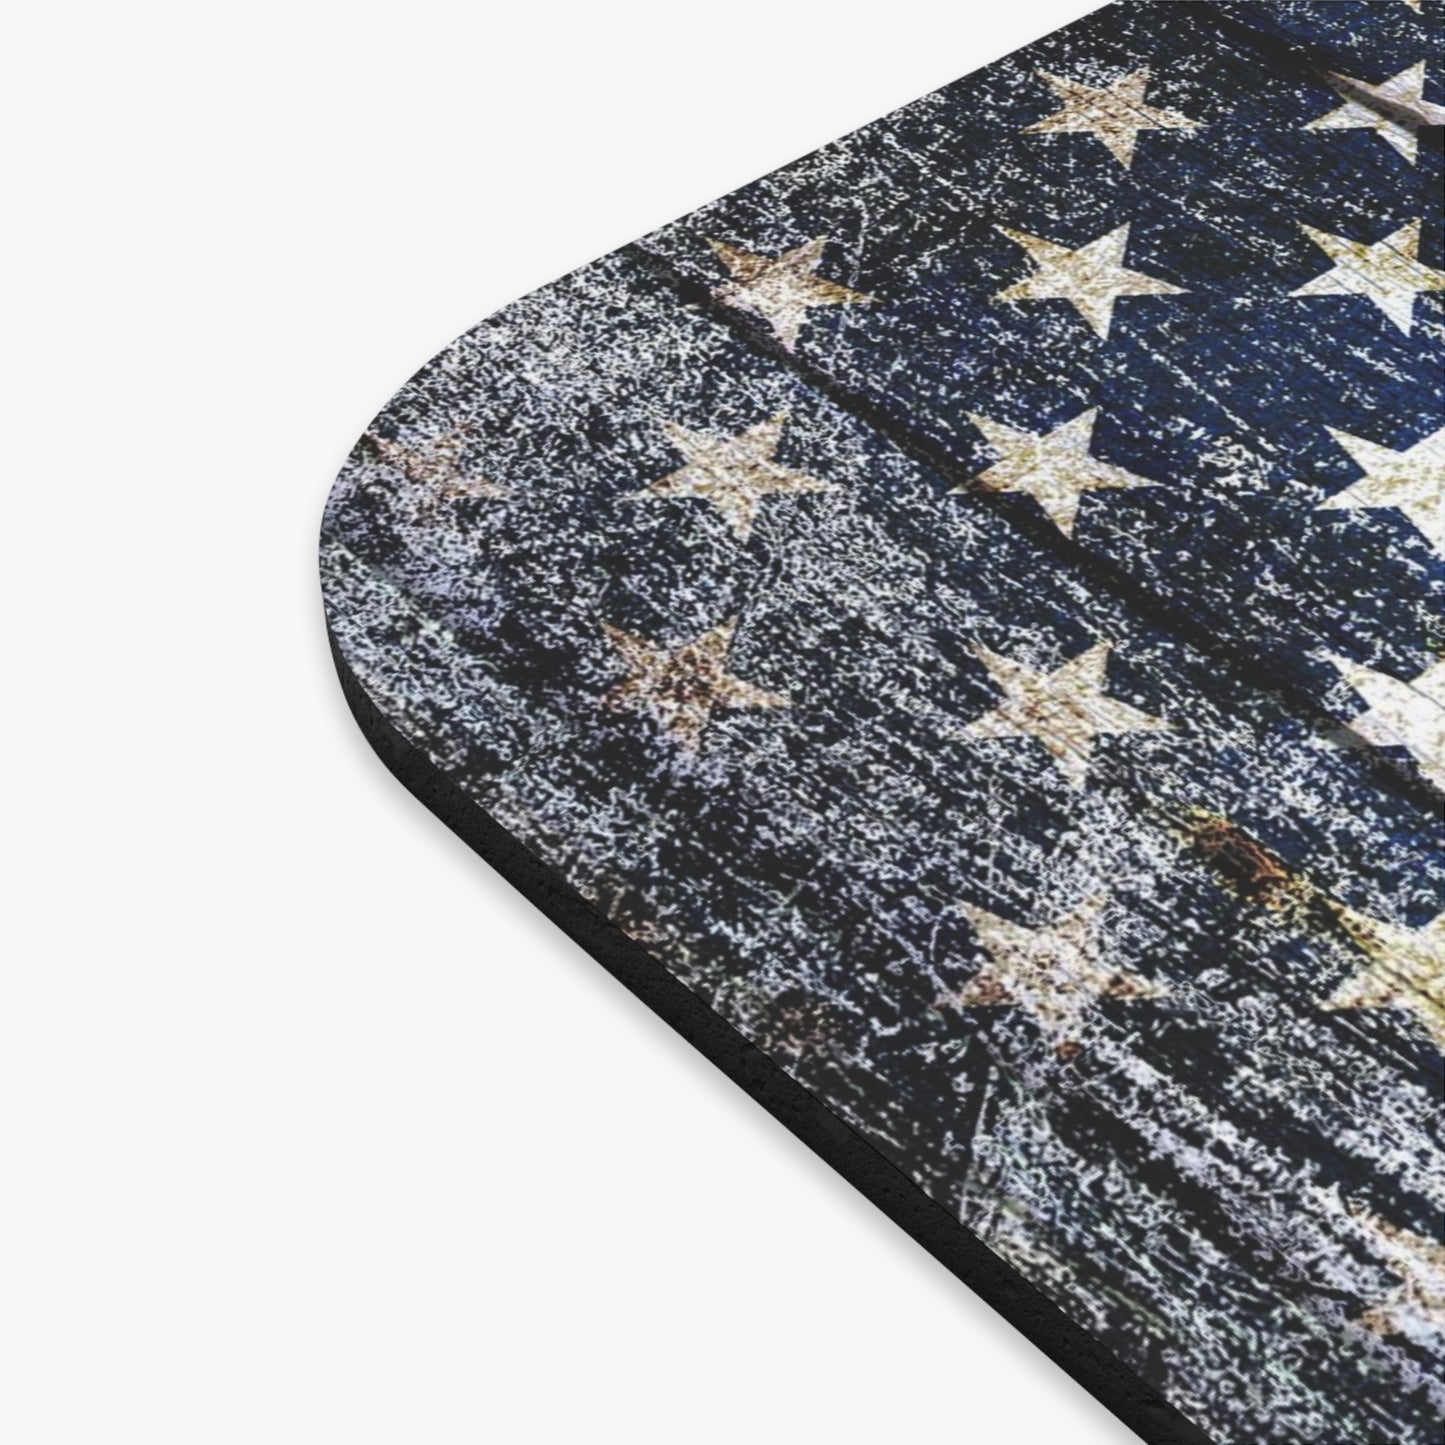 American Flag Themed Office Decor - American Flag on Old Barn Wood Mouse Pad